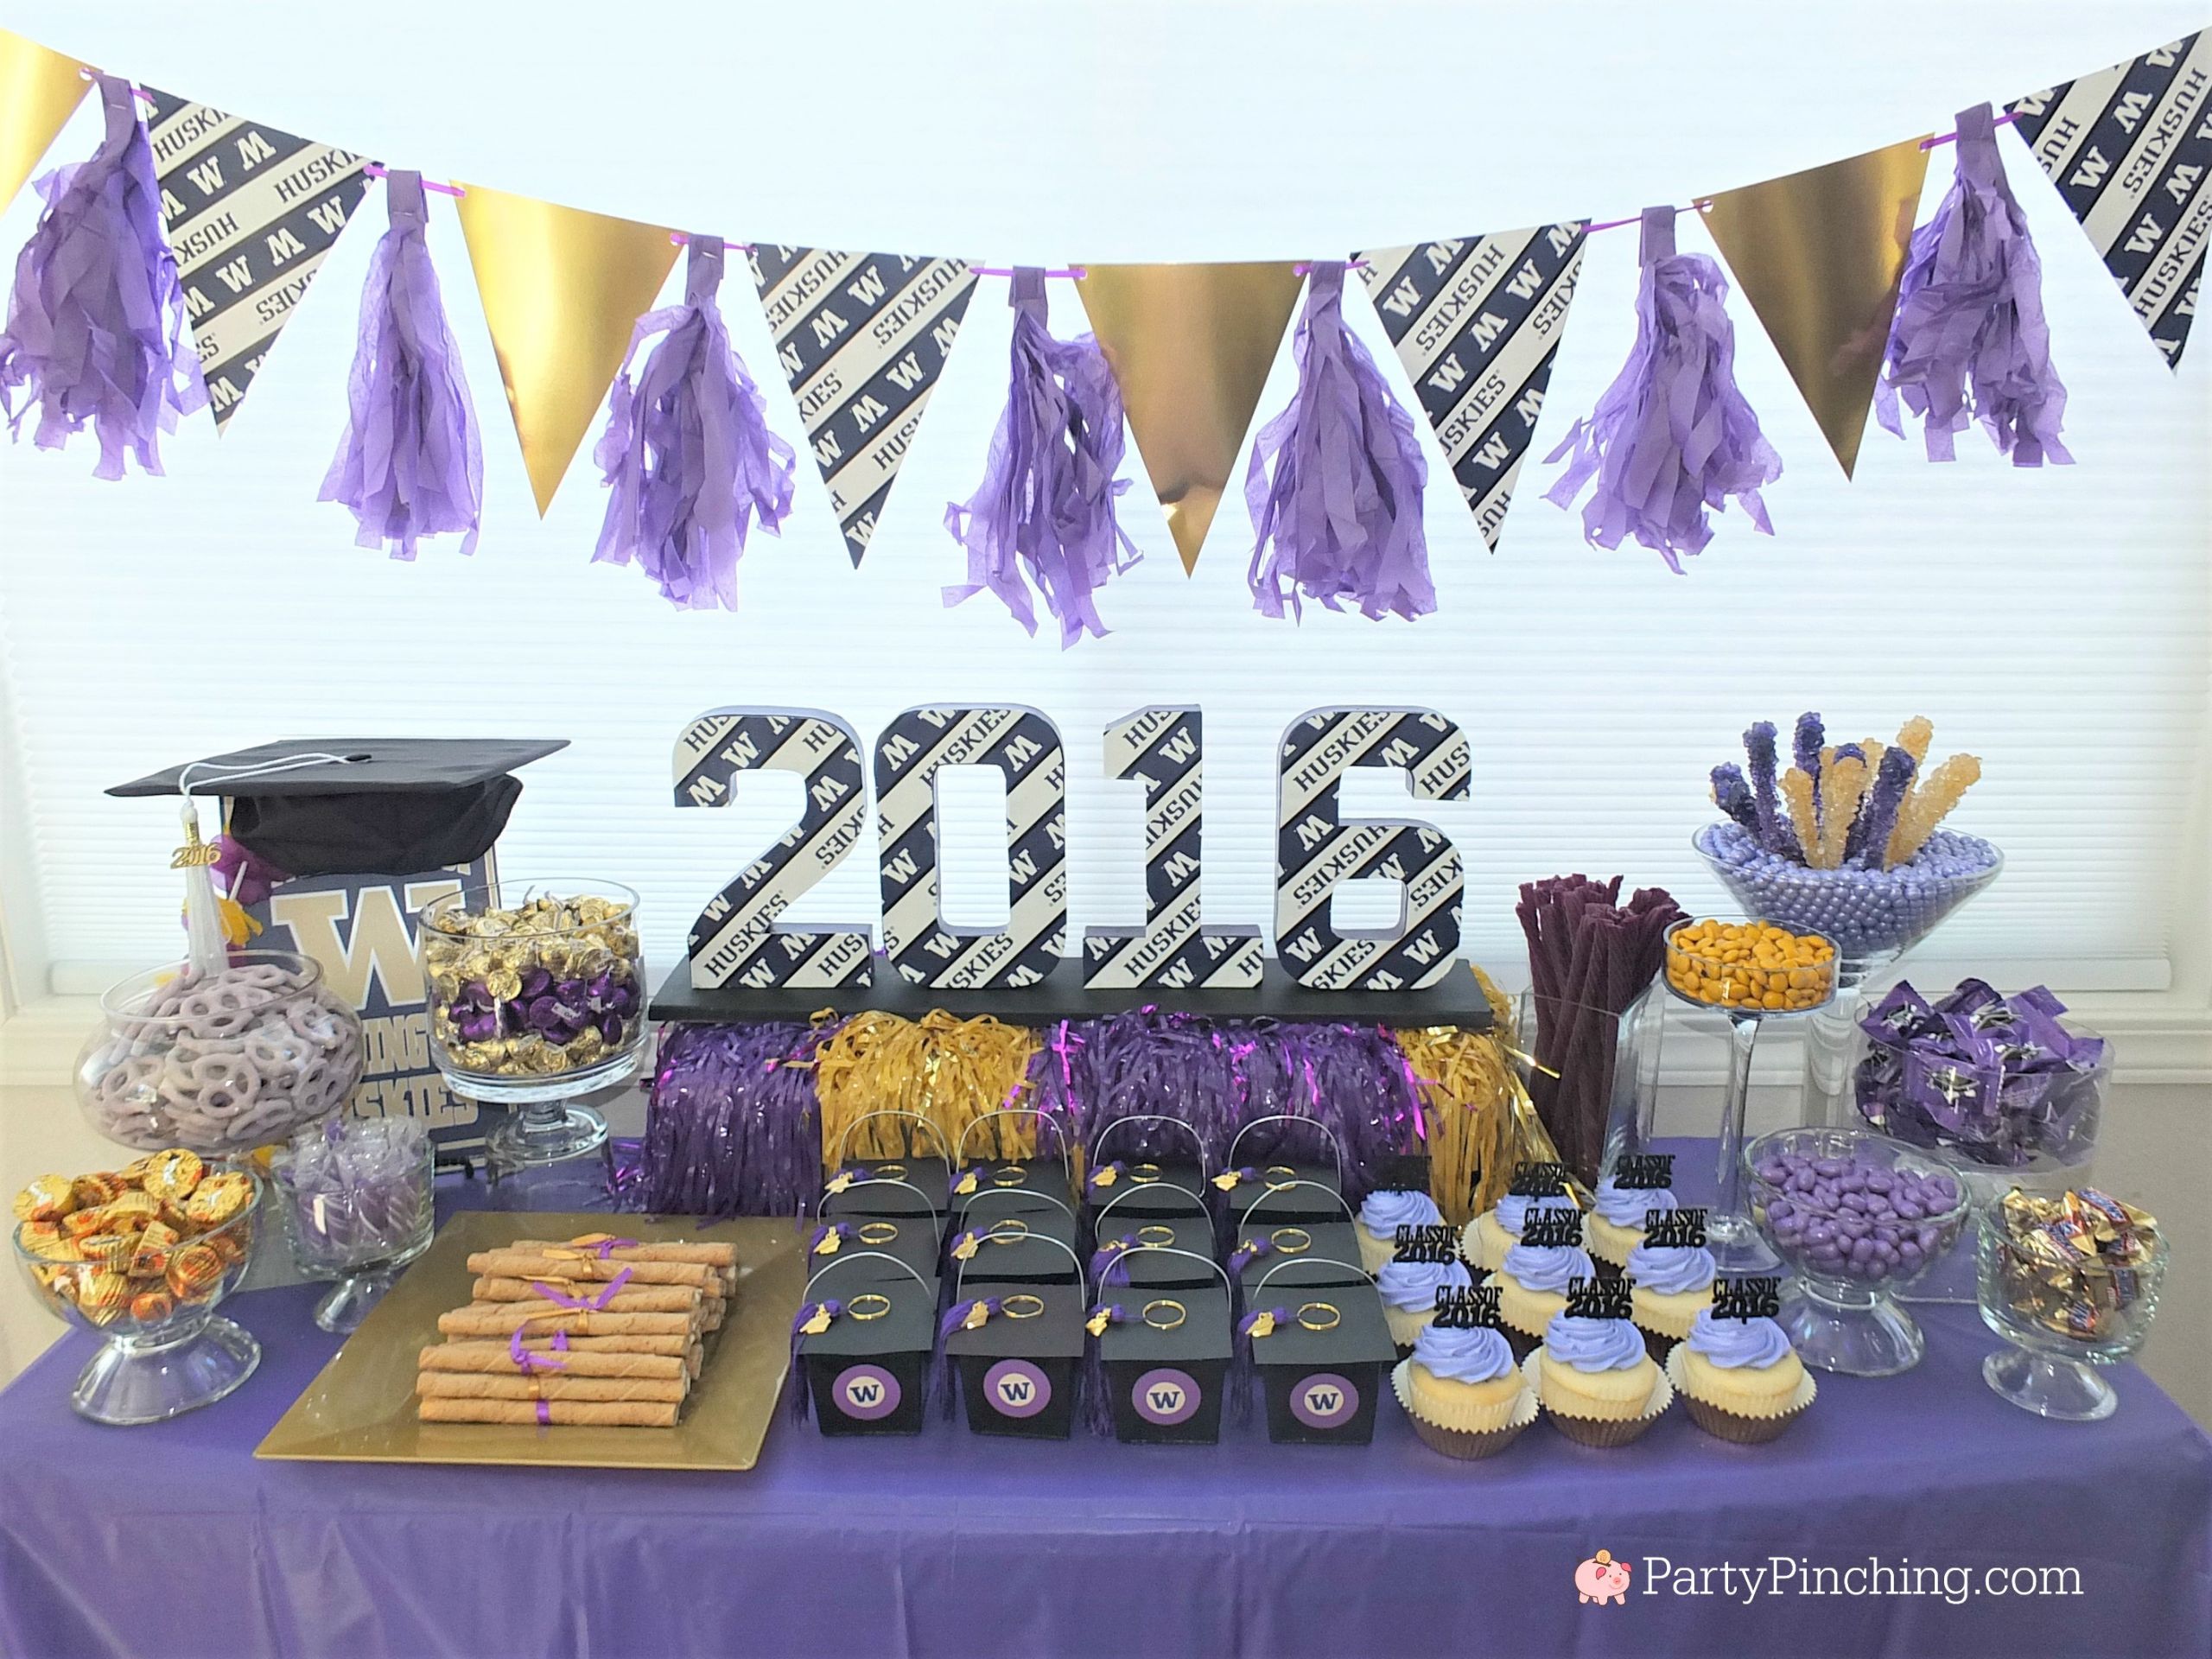 Candy Buffet Ideas For Graduation Party
 College Graduation Party Graduation Party Ideas and Food